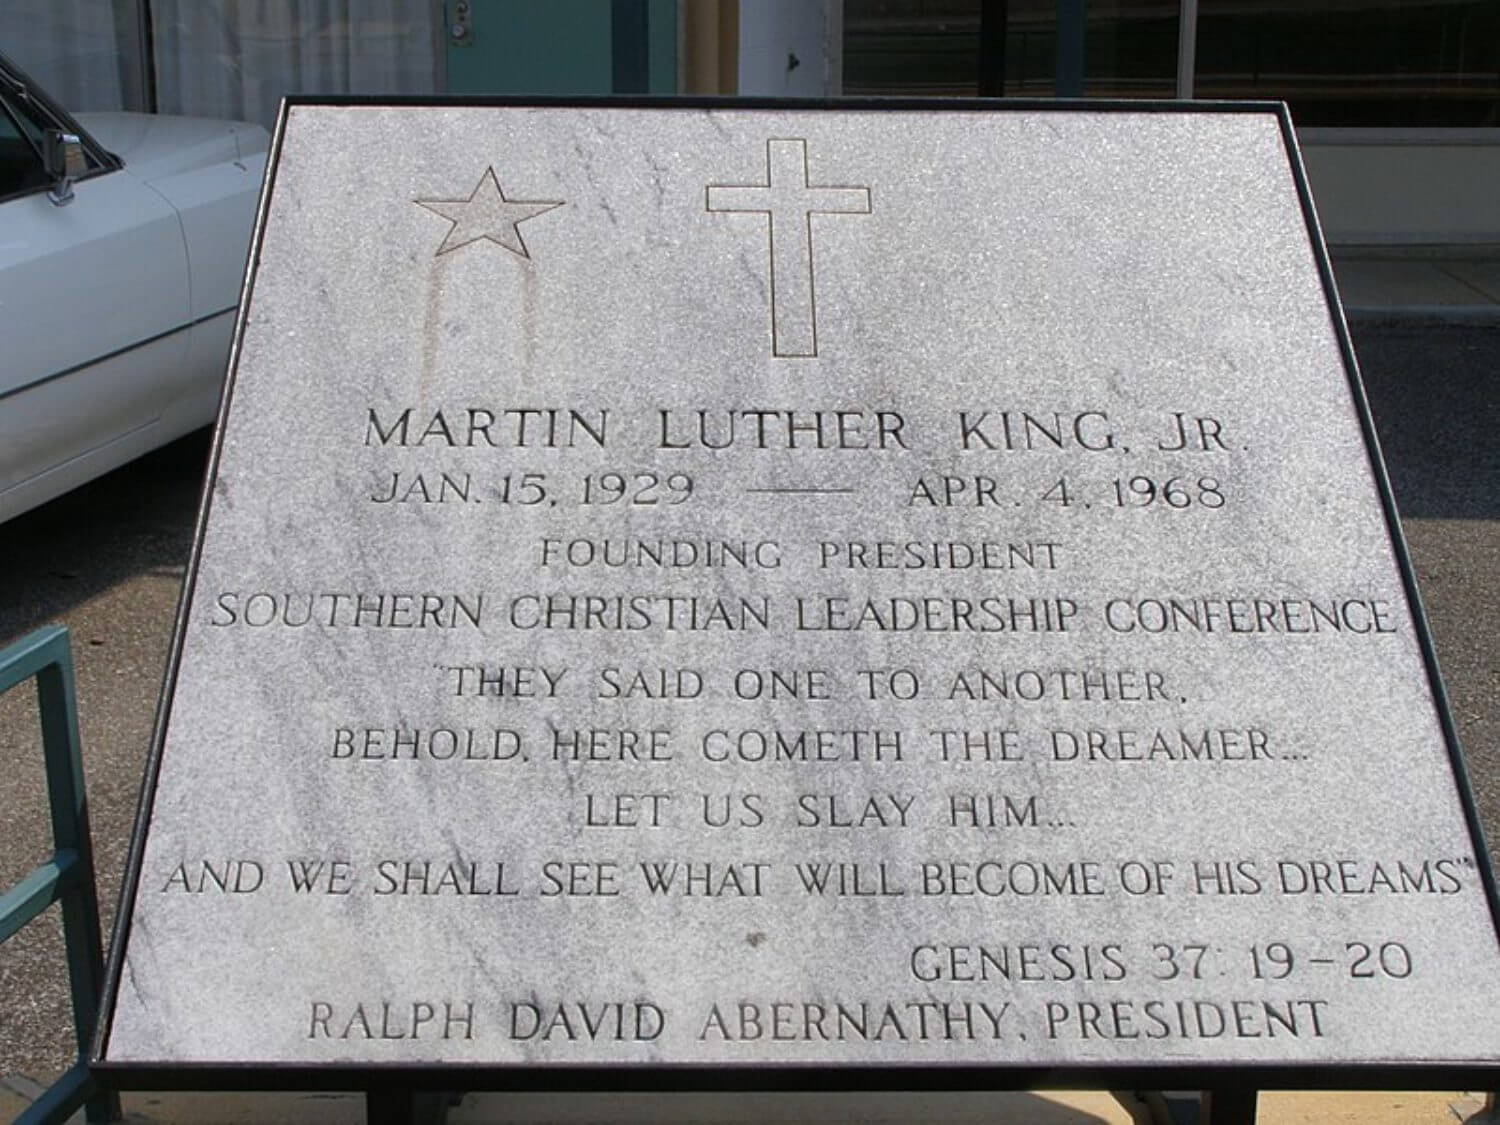 Martin Luther King tribute plaque - Wikimedia Commons photo by Chris Light